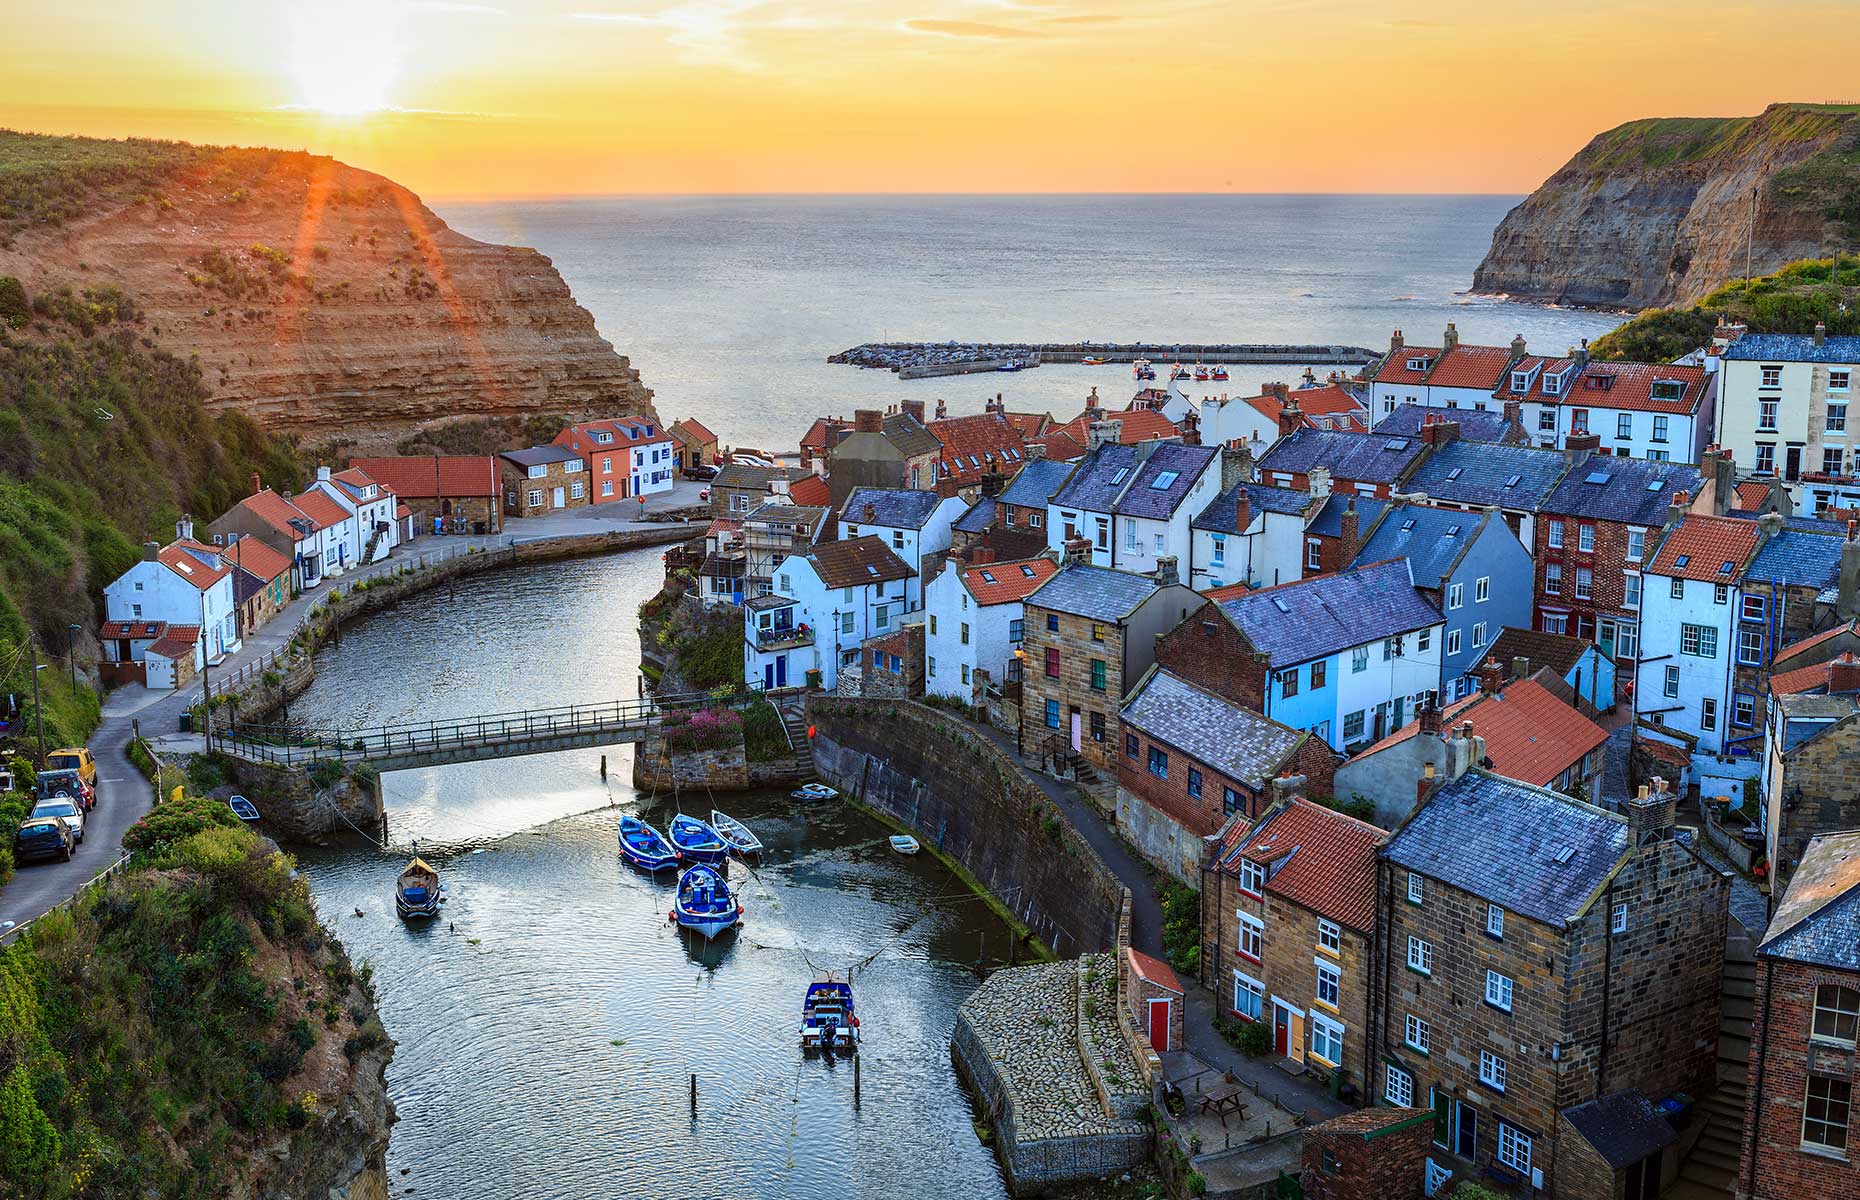 Staithes at sunrise (Image: Lukasz Pajor/Shutterstock)